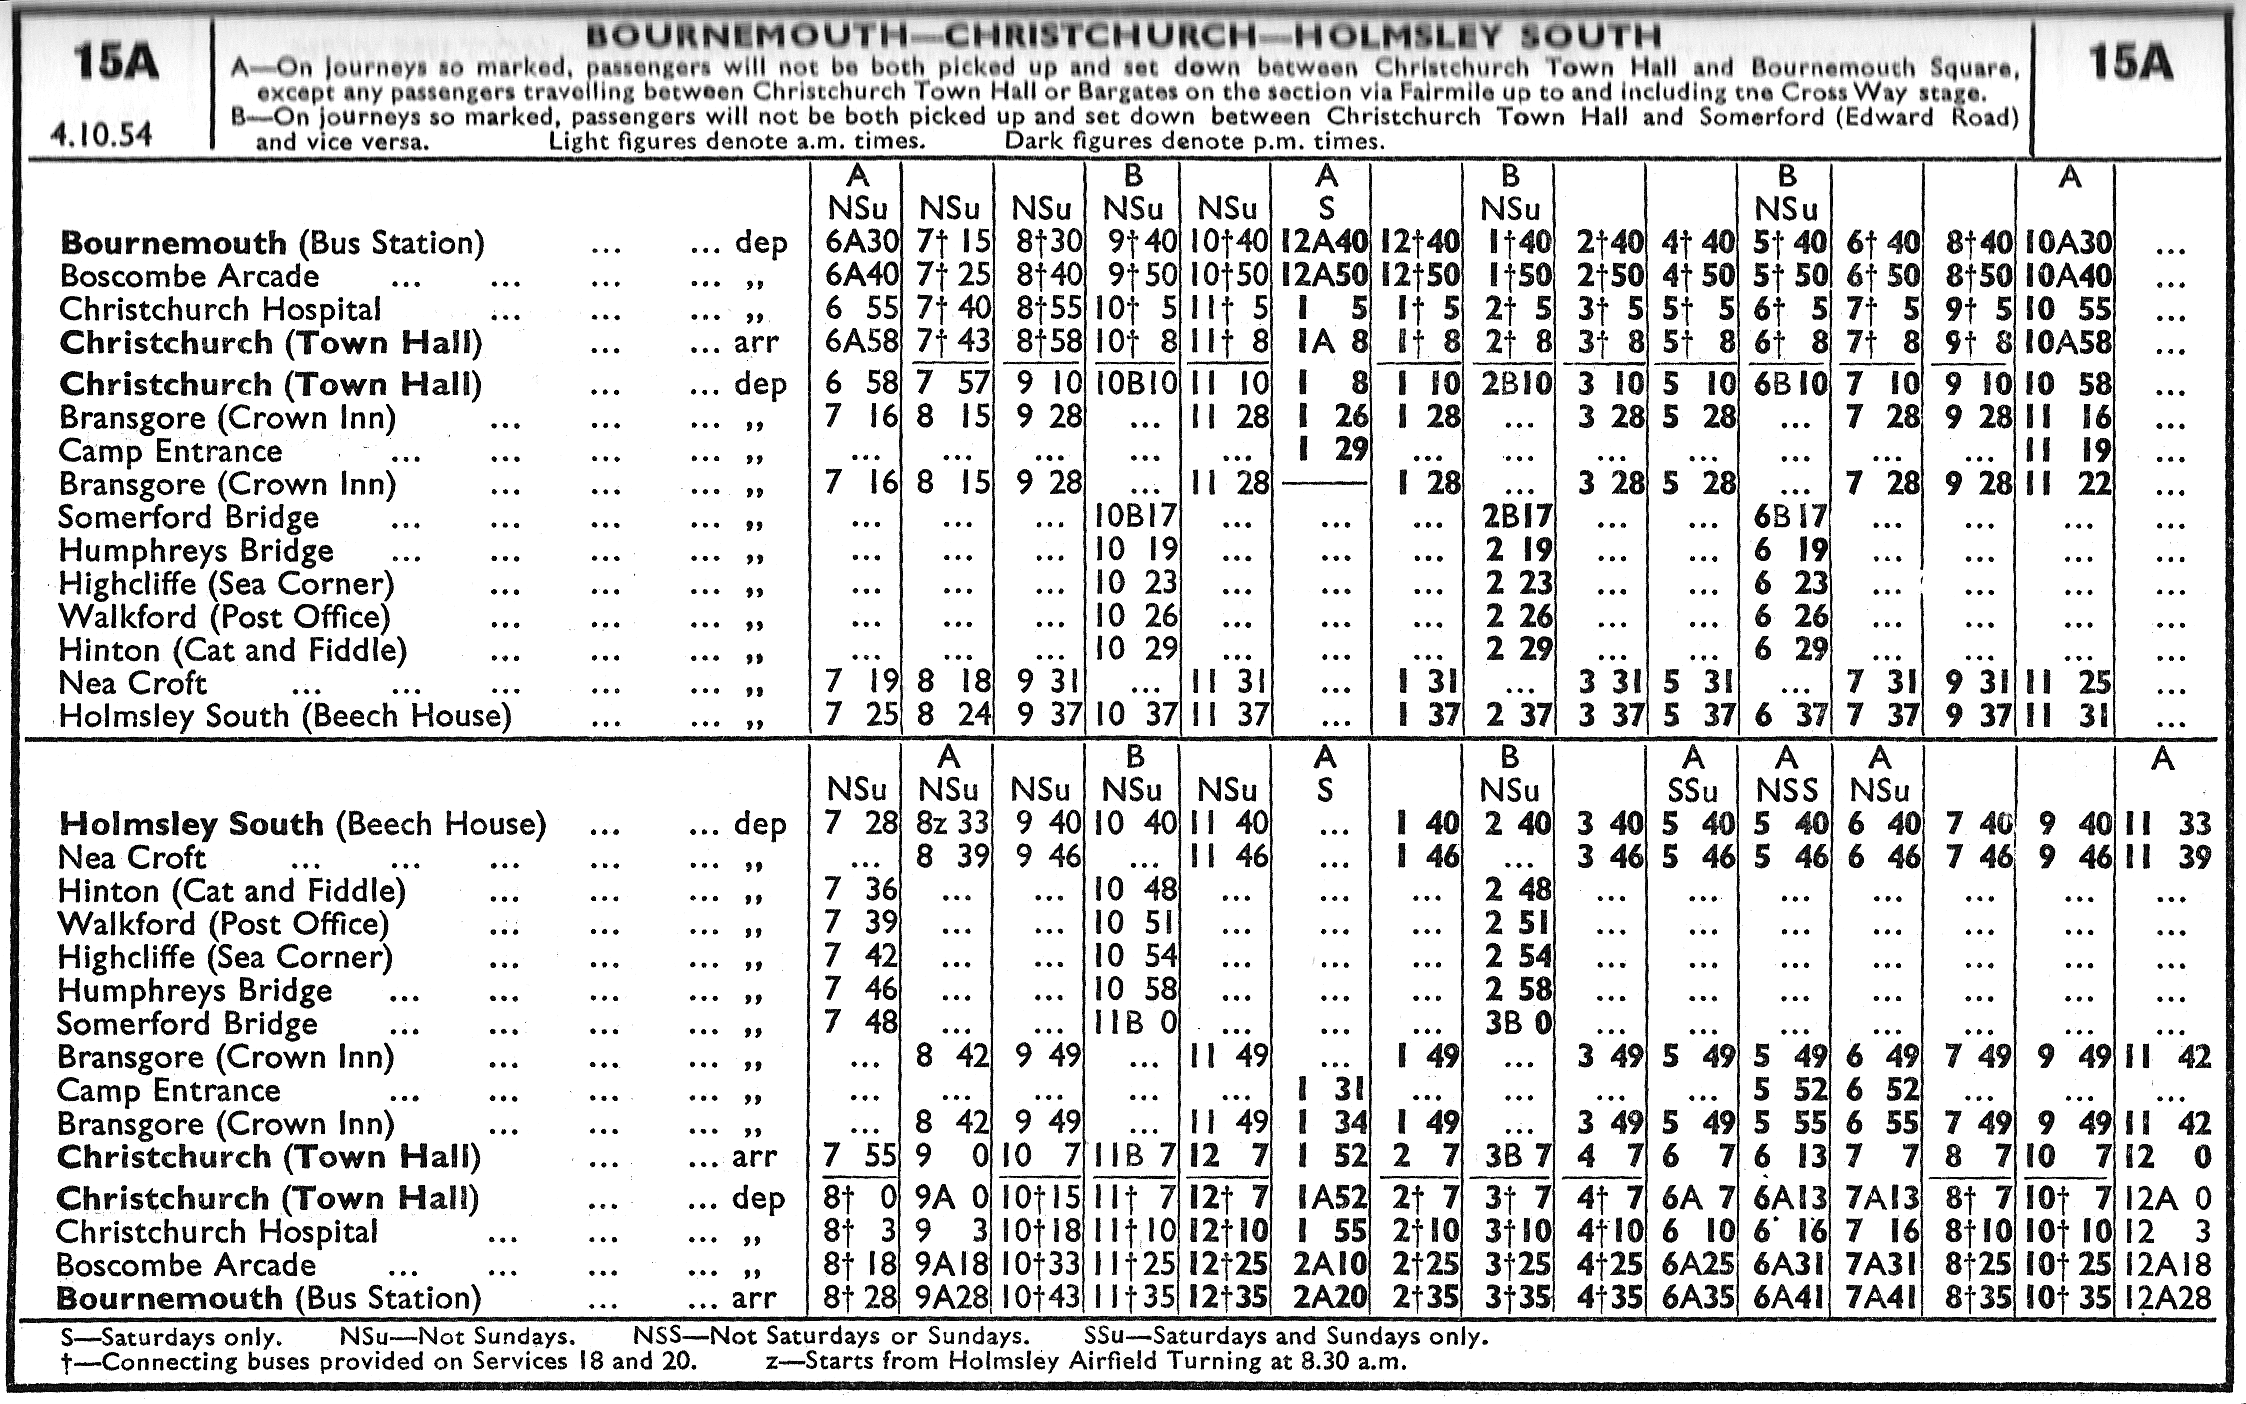 15A Timetable